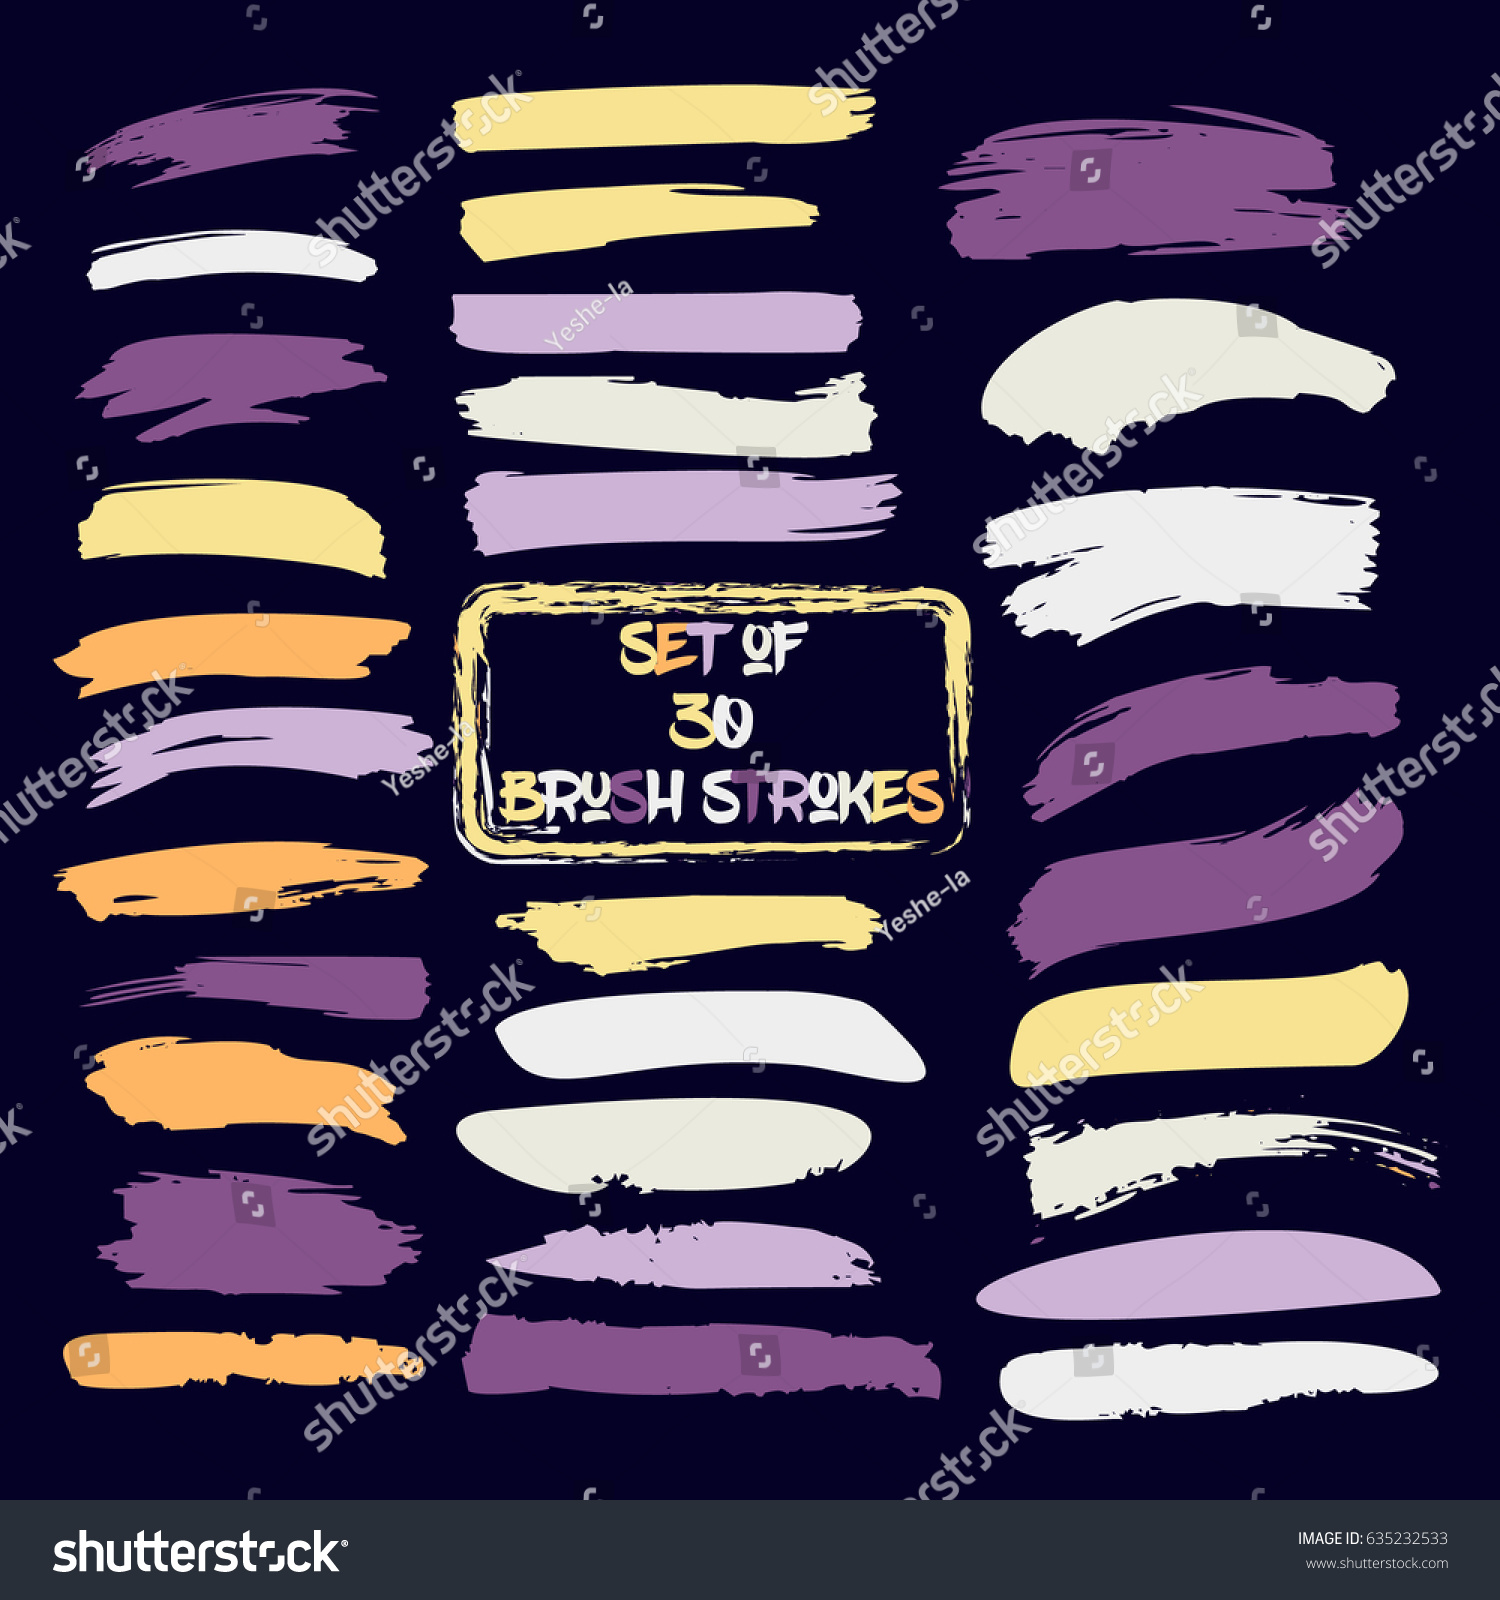 SVG of Set of thirty trendy yellow, orange, and purple vector brush strokes or backgrounds. Hand painted vintage ink brush strokes, brushes and lines. Dirty grunge artistic design elements. Text backgrounds svg